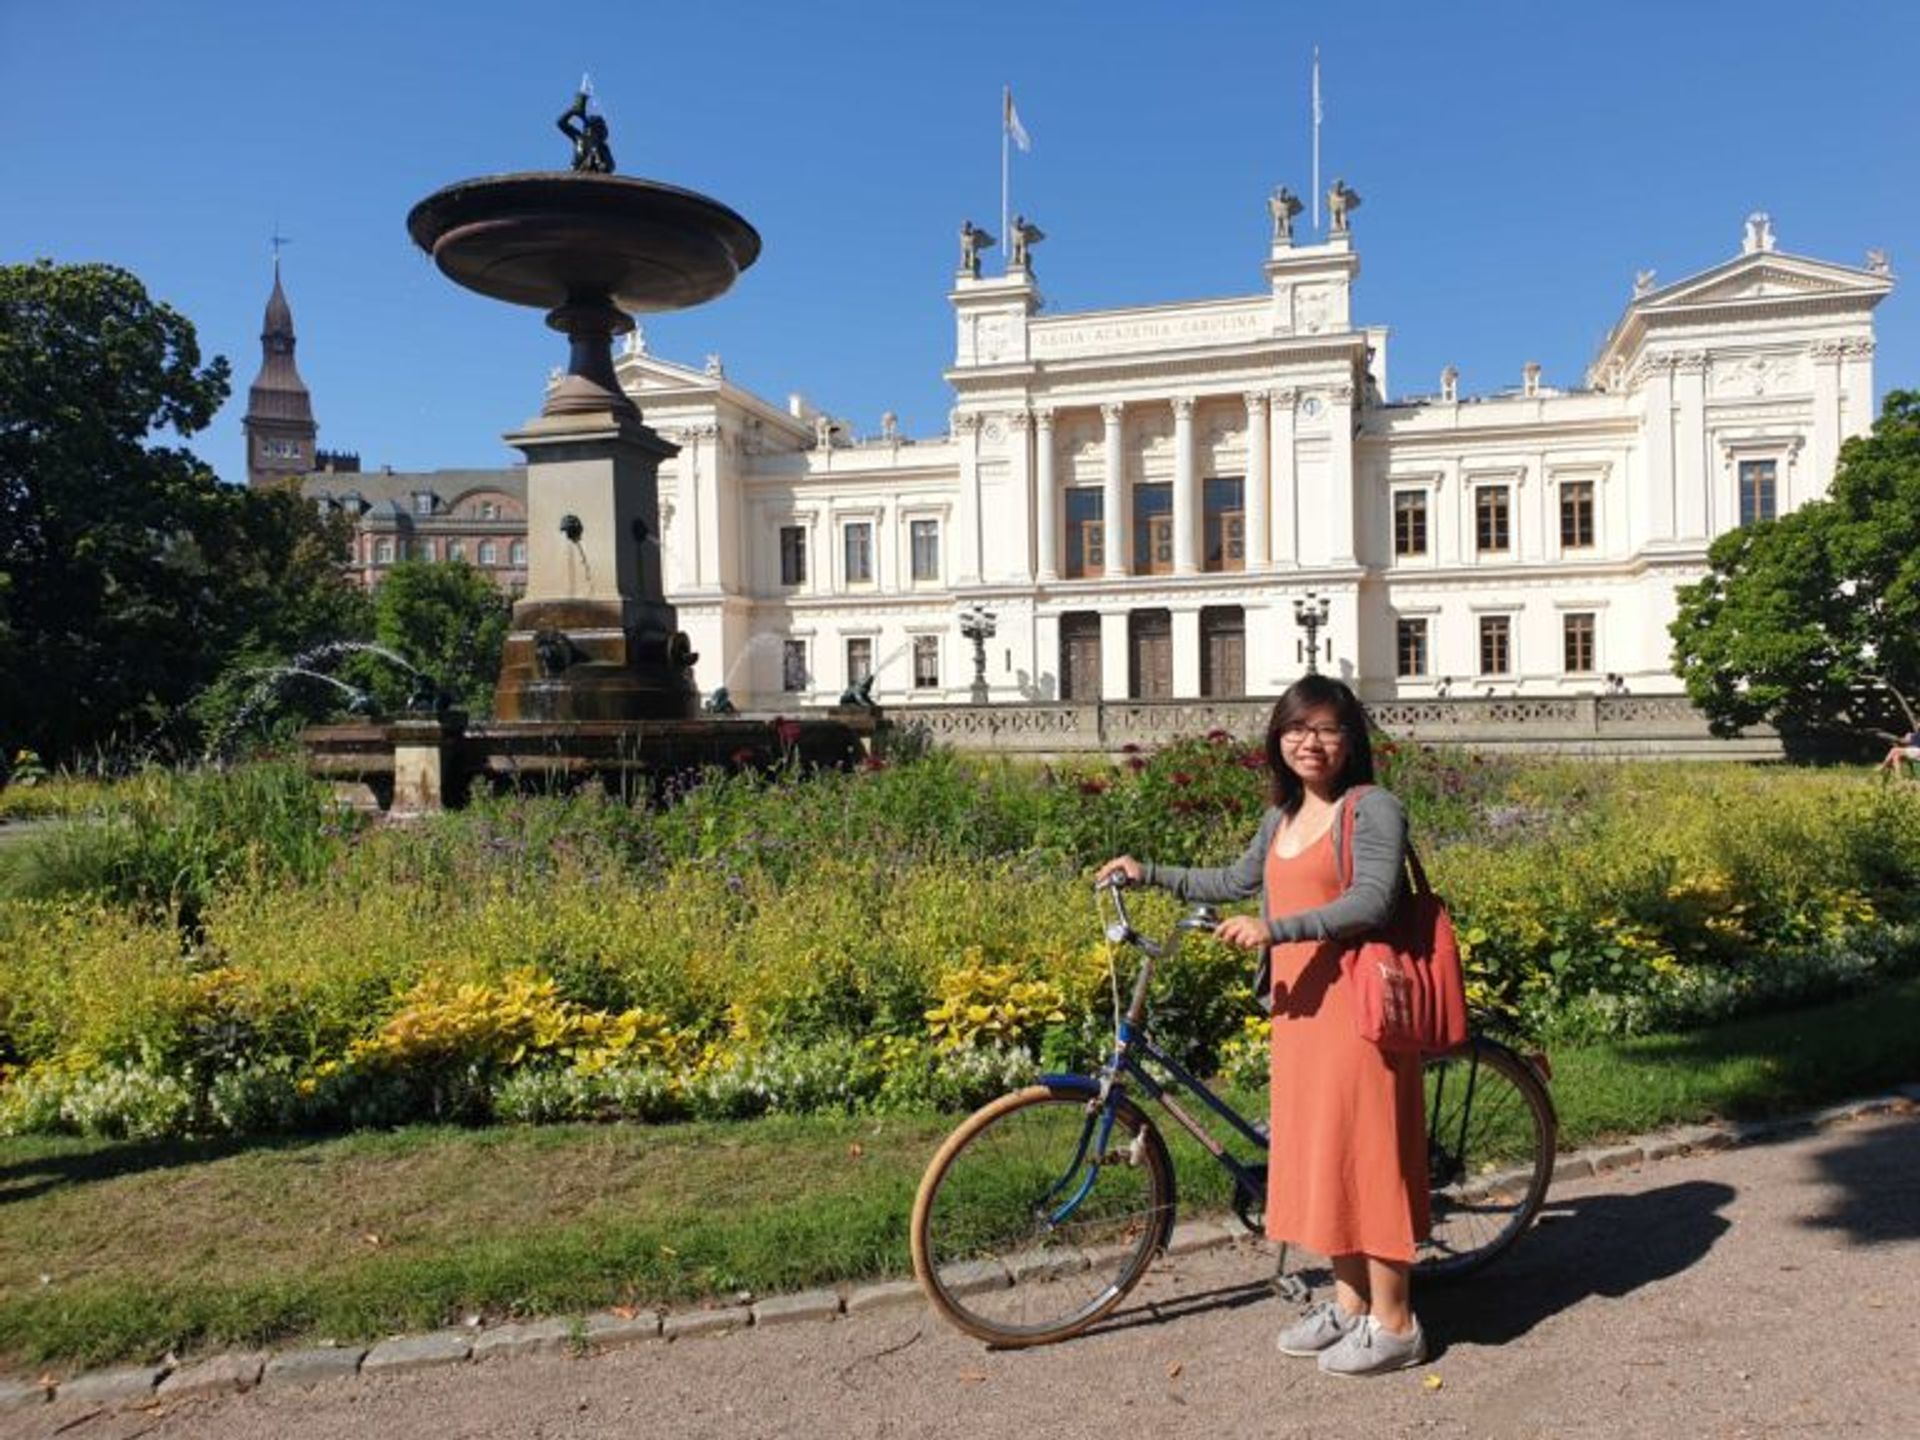 Student standing with a bicycle in front of a white building.